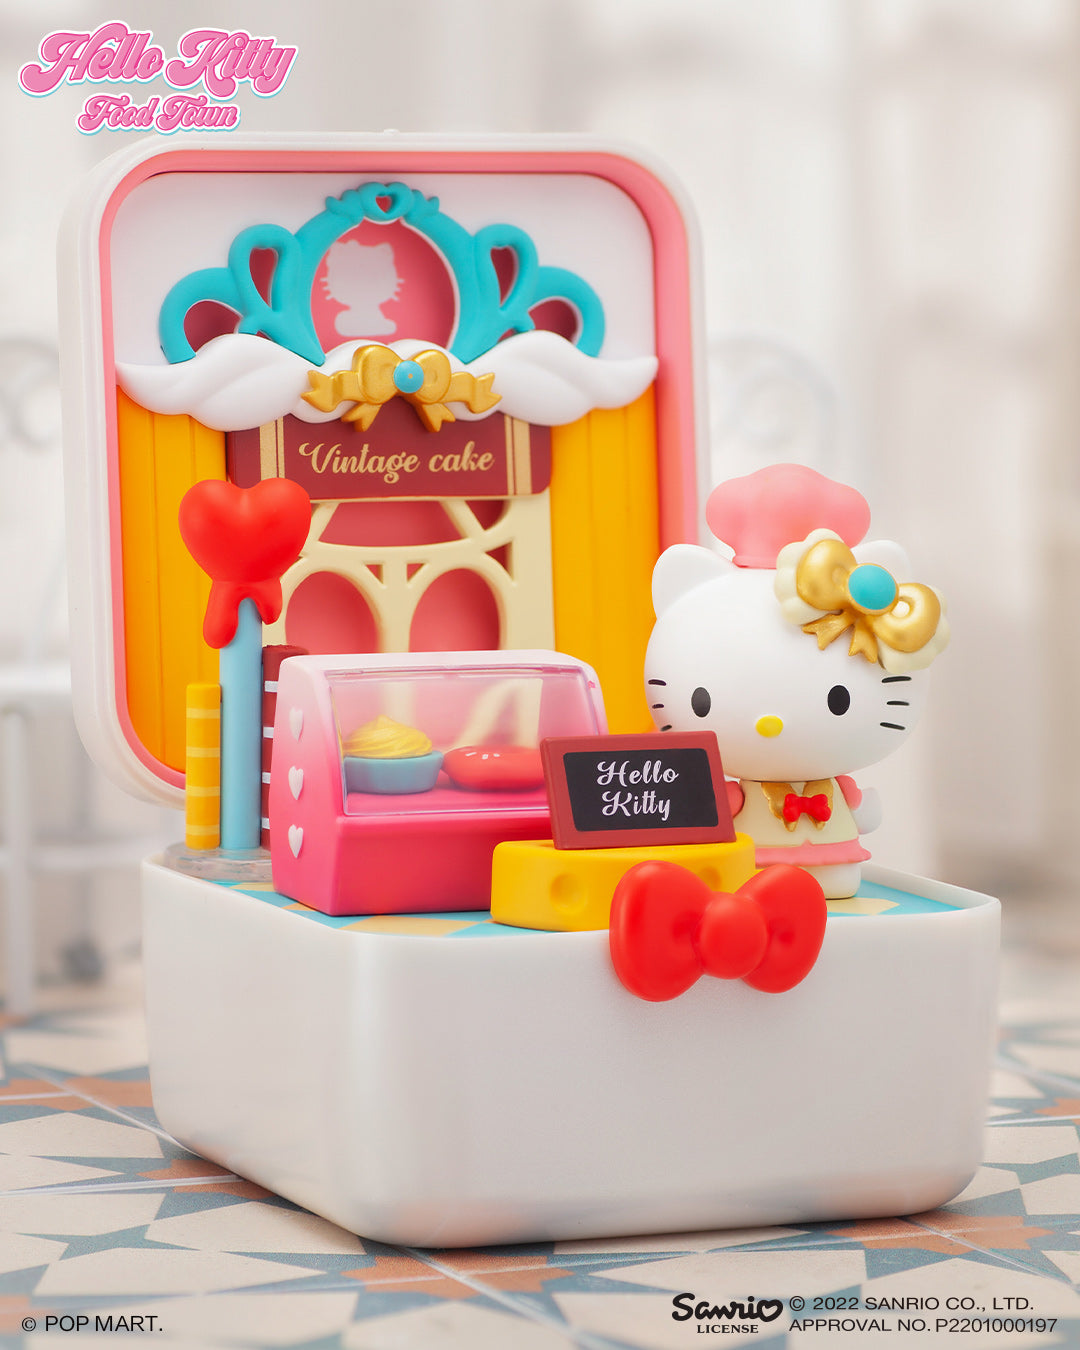 POP MART Hello Kitty Food Town Series-Single Box (Random)-Pop Mart-Ace Cards &amp; Collectibles